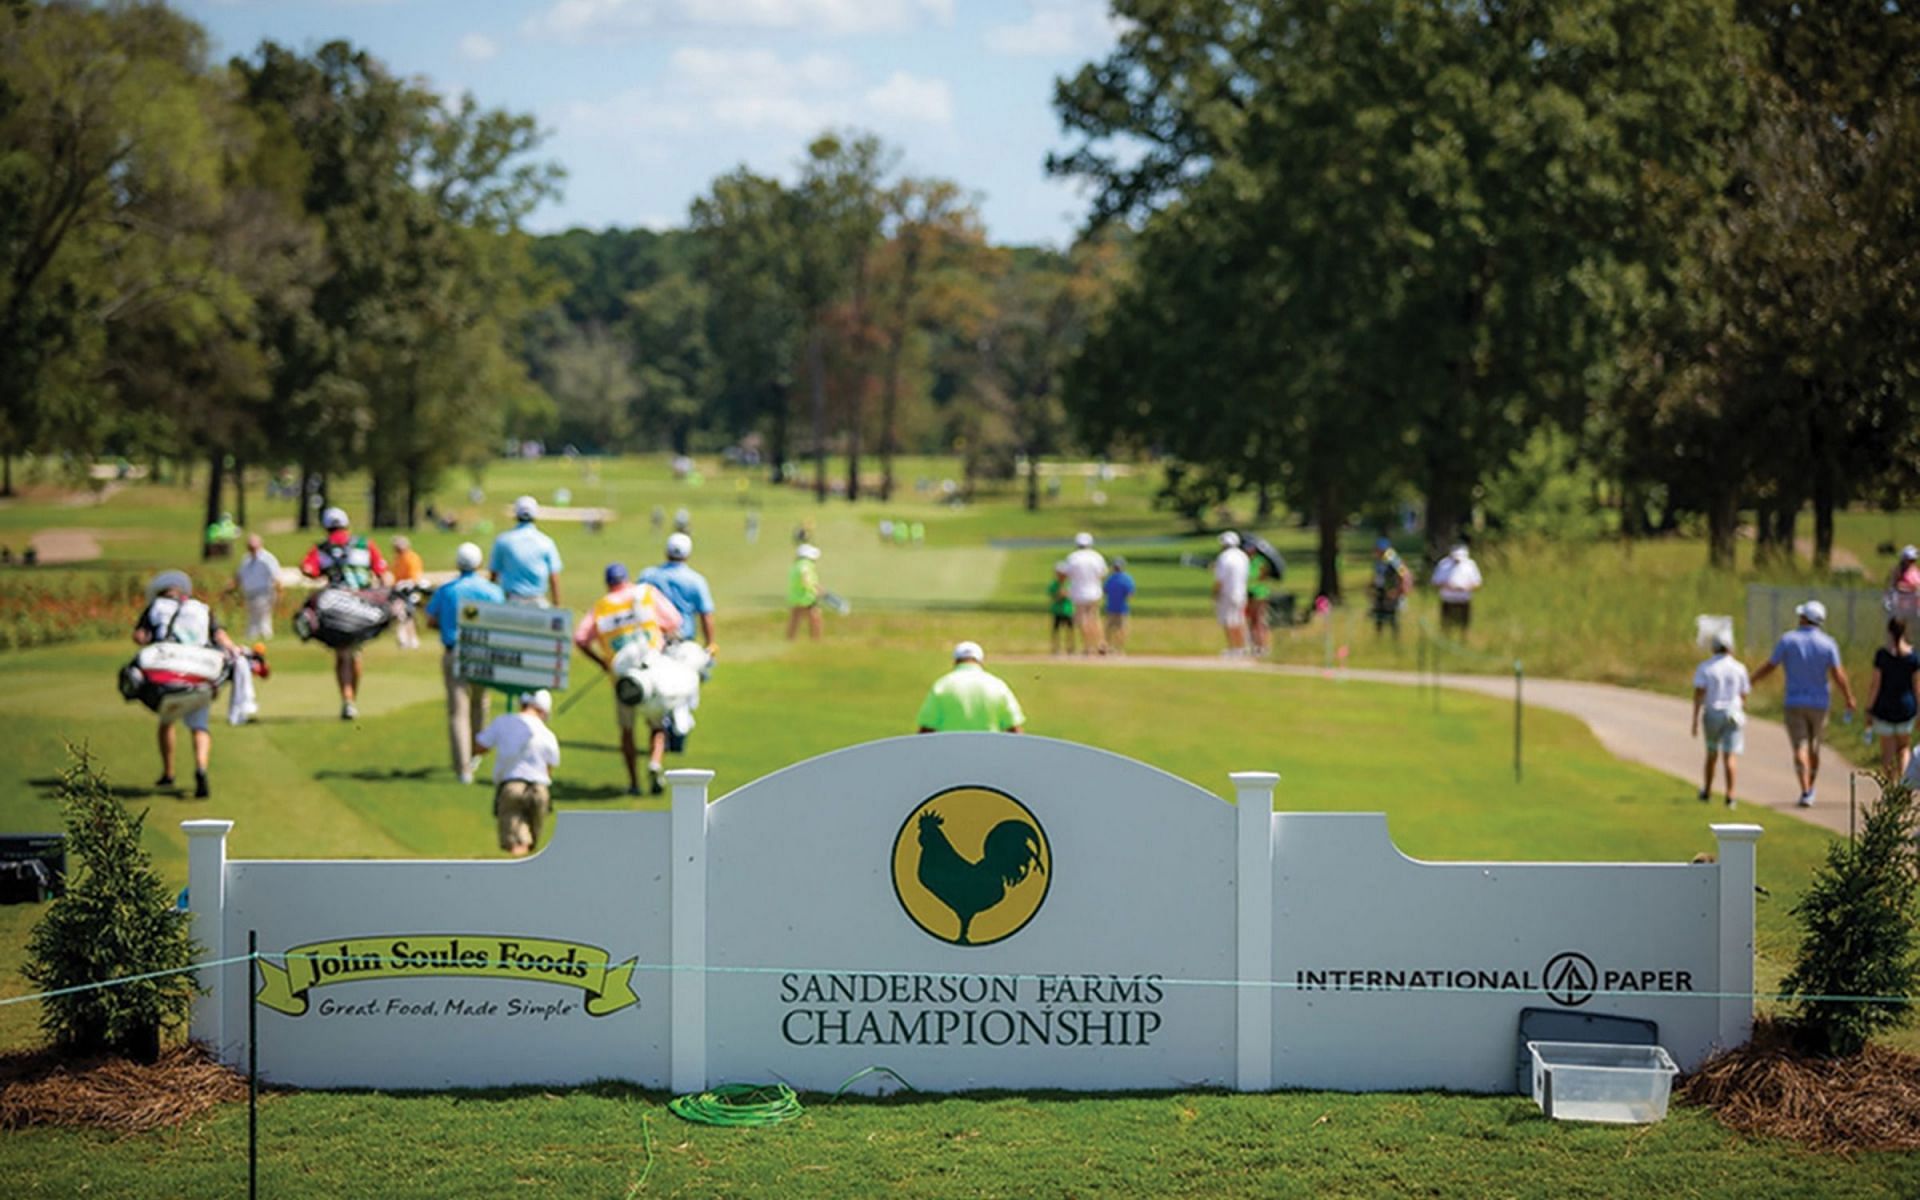 The Sanderson Farms Championship witnessed few big names missing cuts